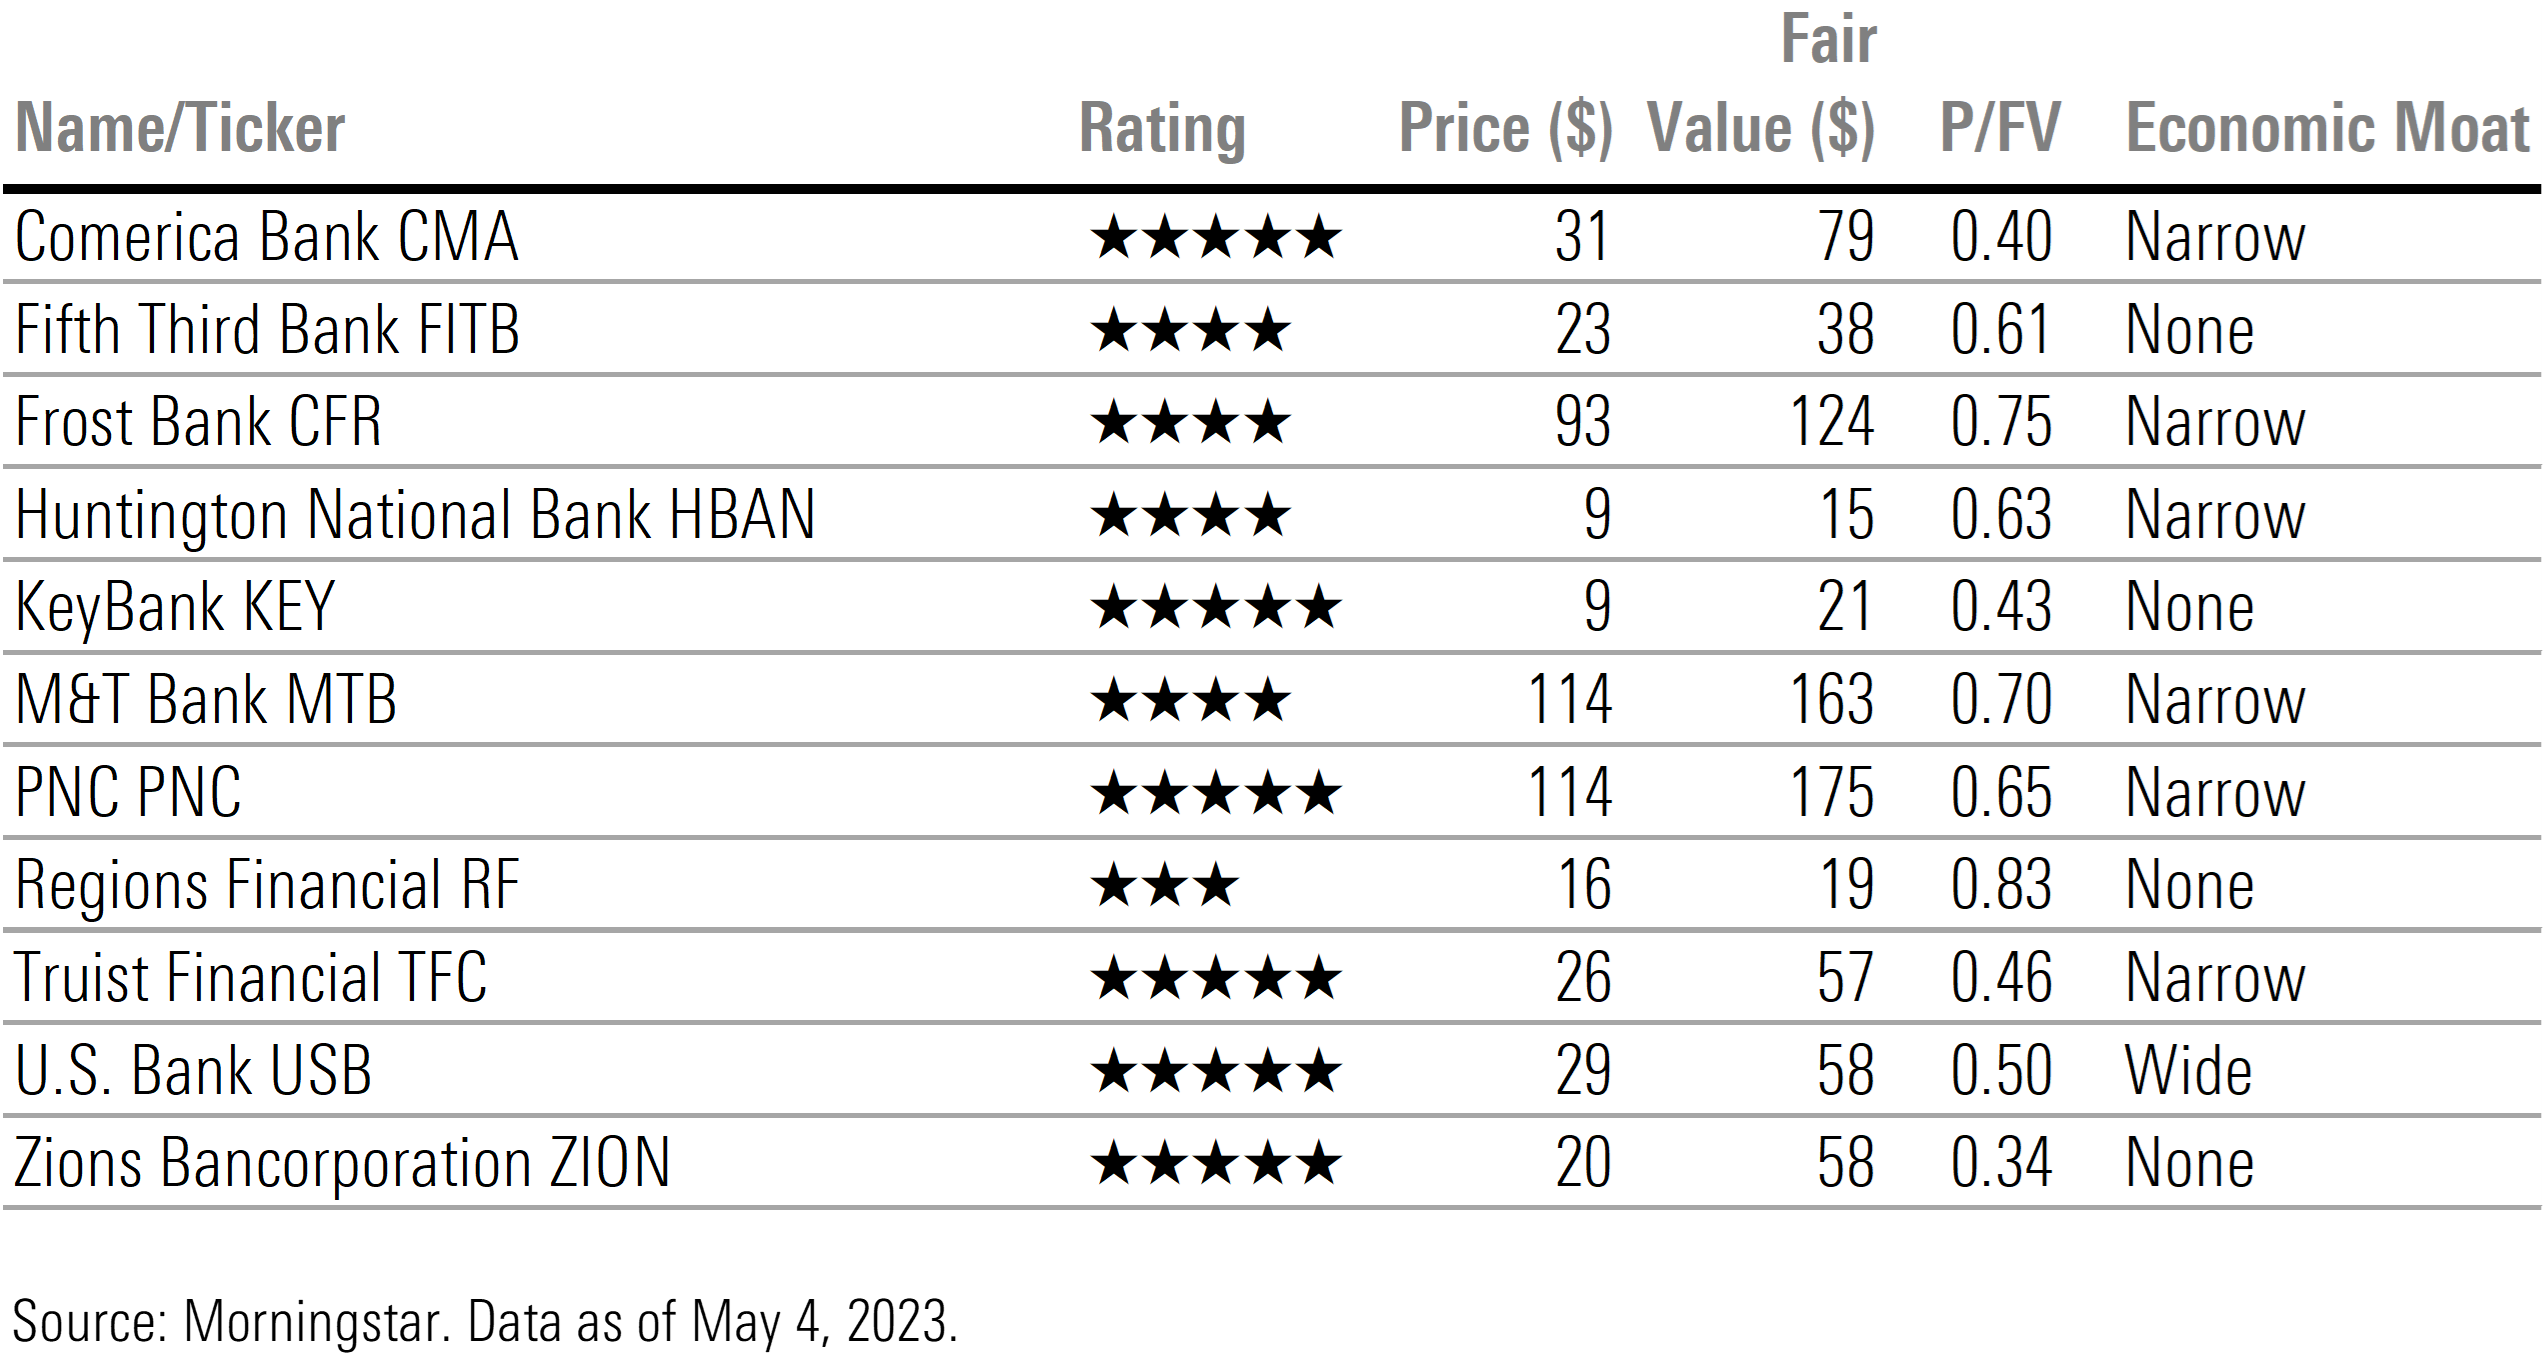 Table containing price to fair value data for Morningstar's U.S. Regional Bank Coverage